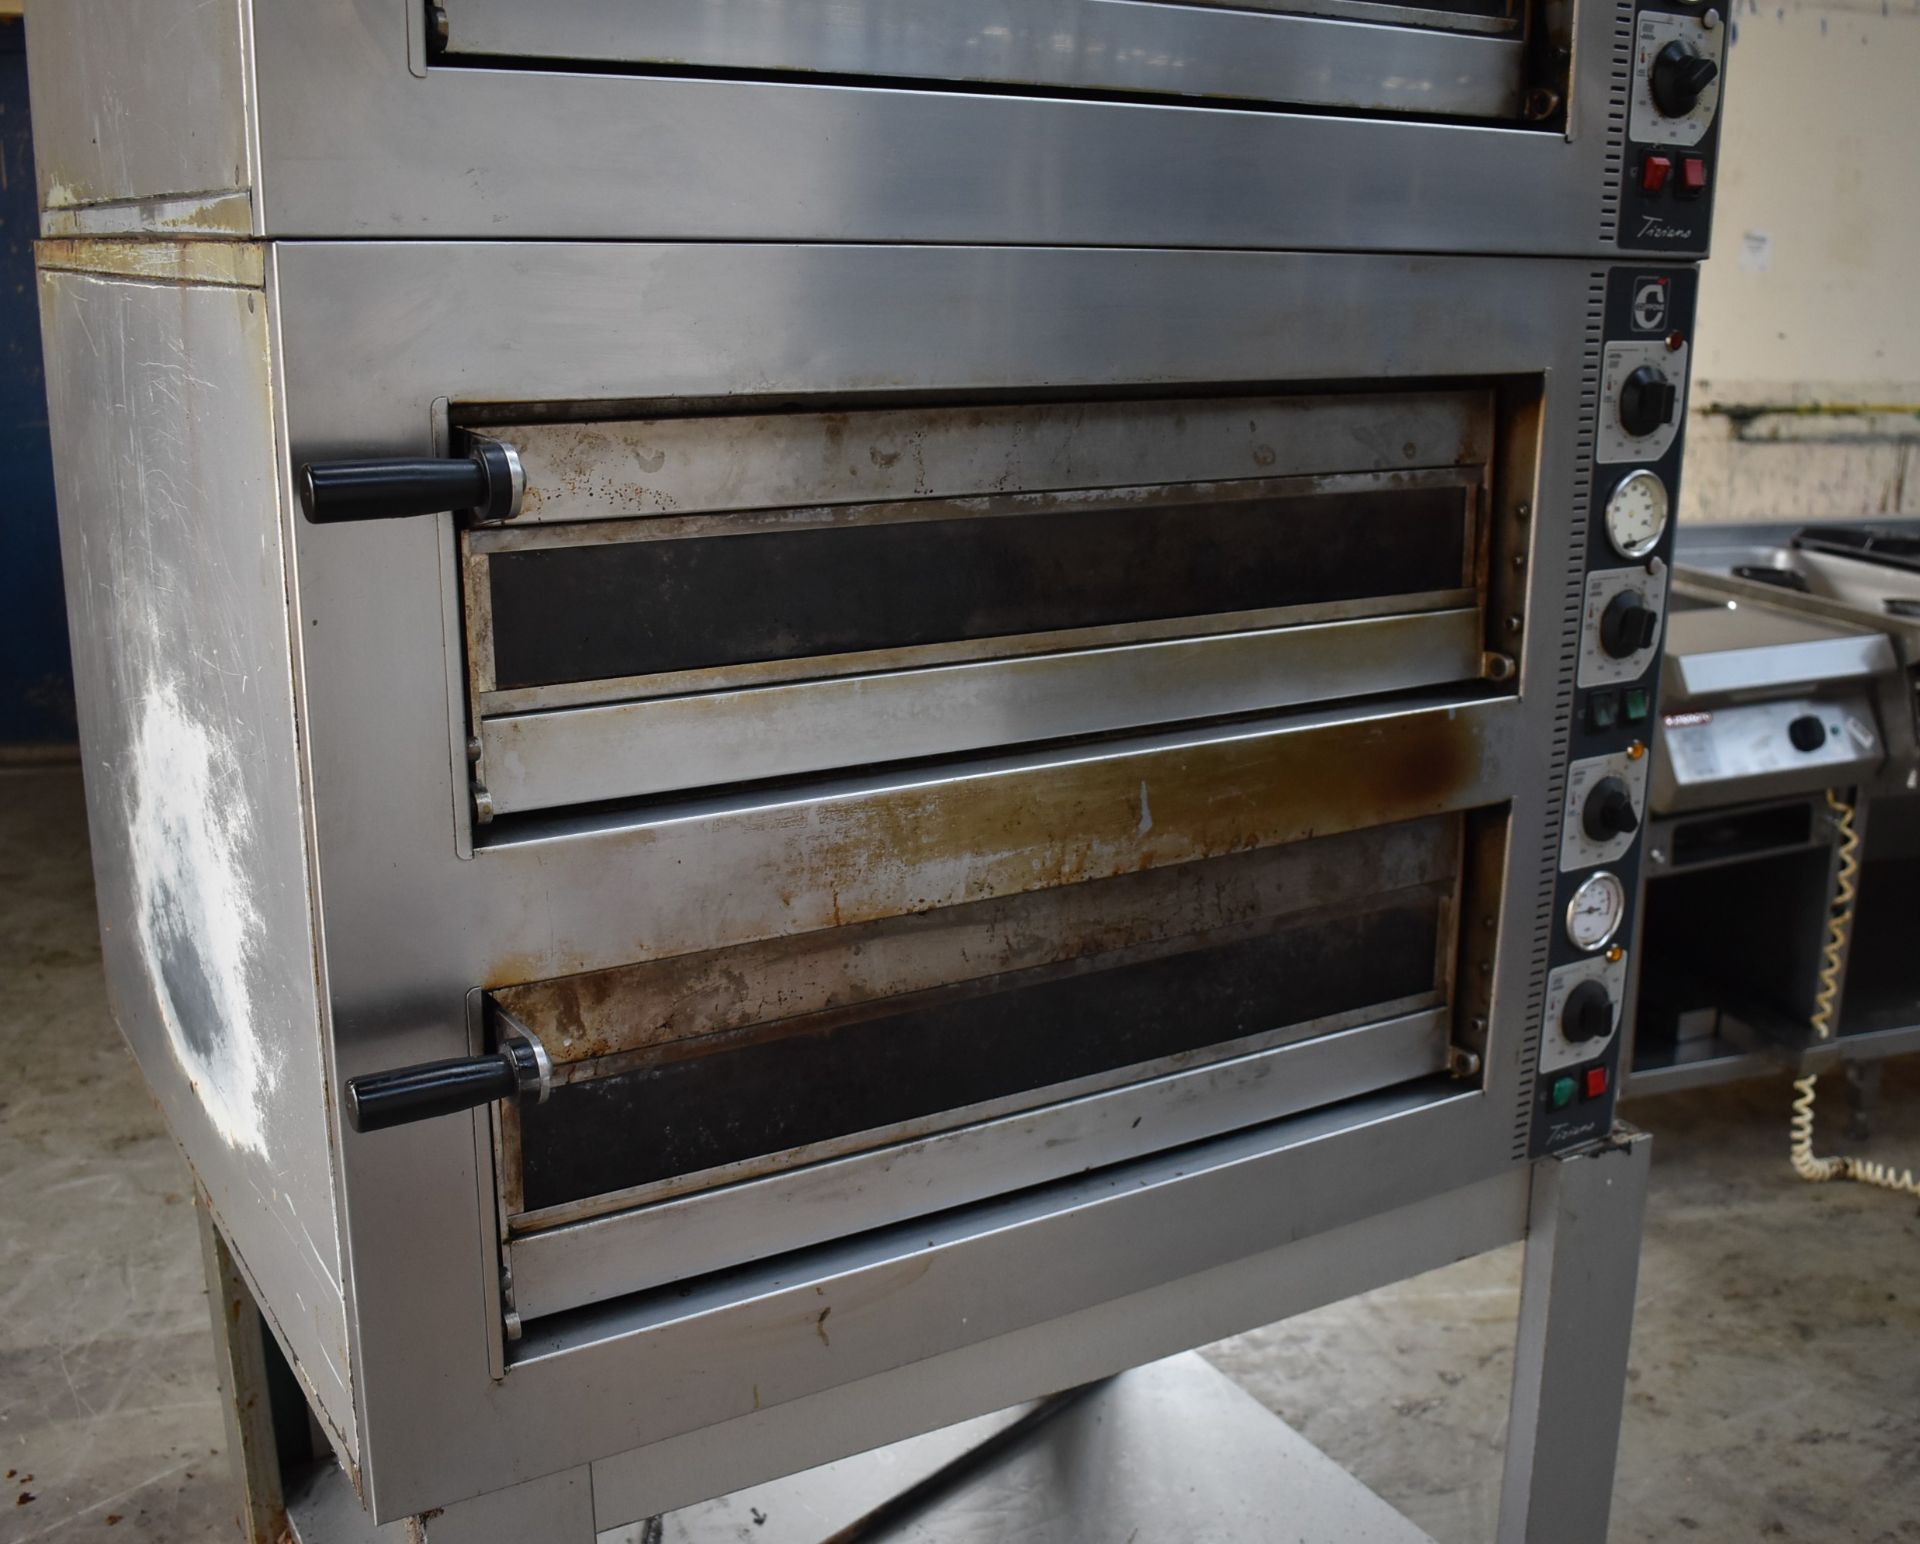 1 x Cuppone Tiziano Series Triple Deck Electric Pizza Oven - 3 Phase - Model TZ435/2M - 2015 Model - - Image 2 of 11